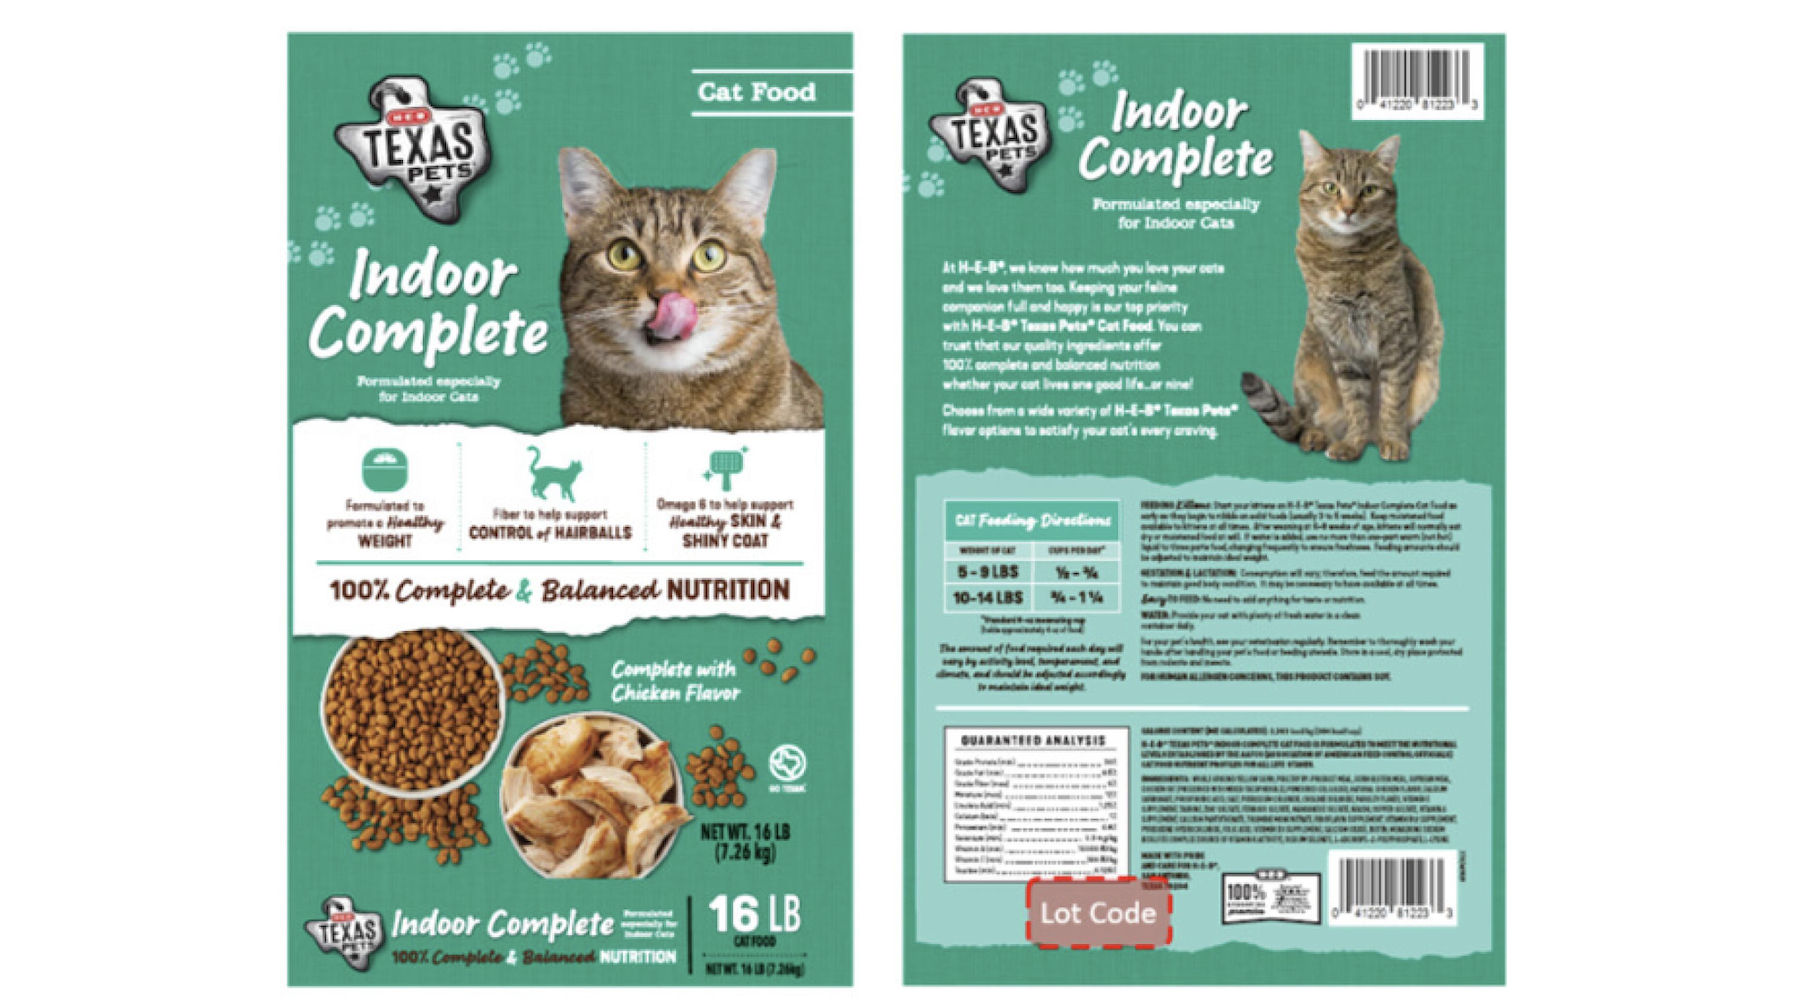 Photos of the front and back of the package of H-E-B Texas Pets Indoor Complete Dry Cat Food that is being recalled.